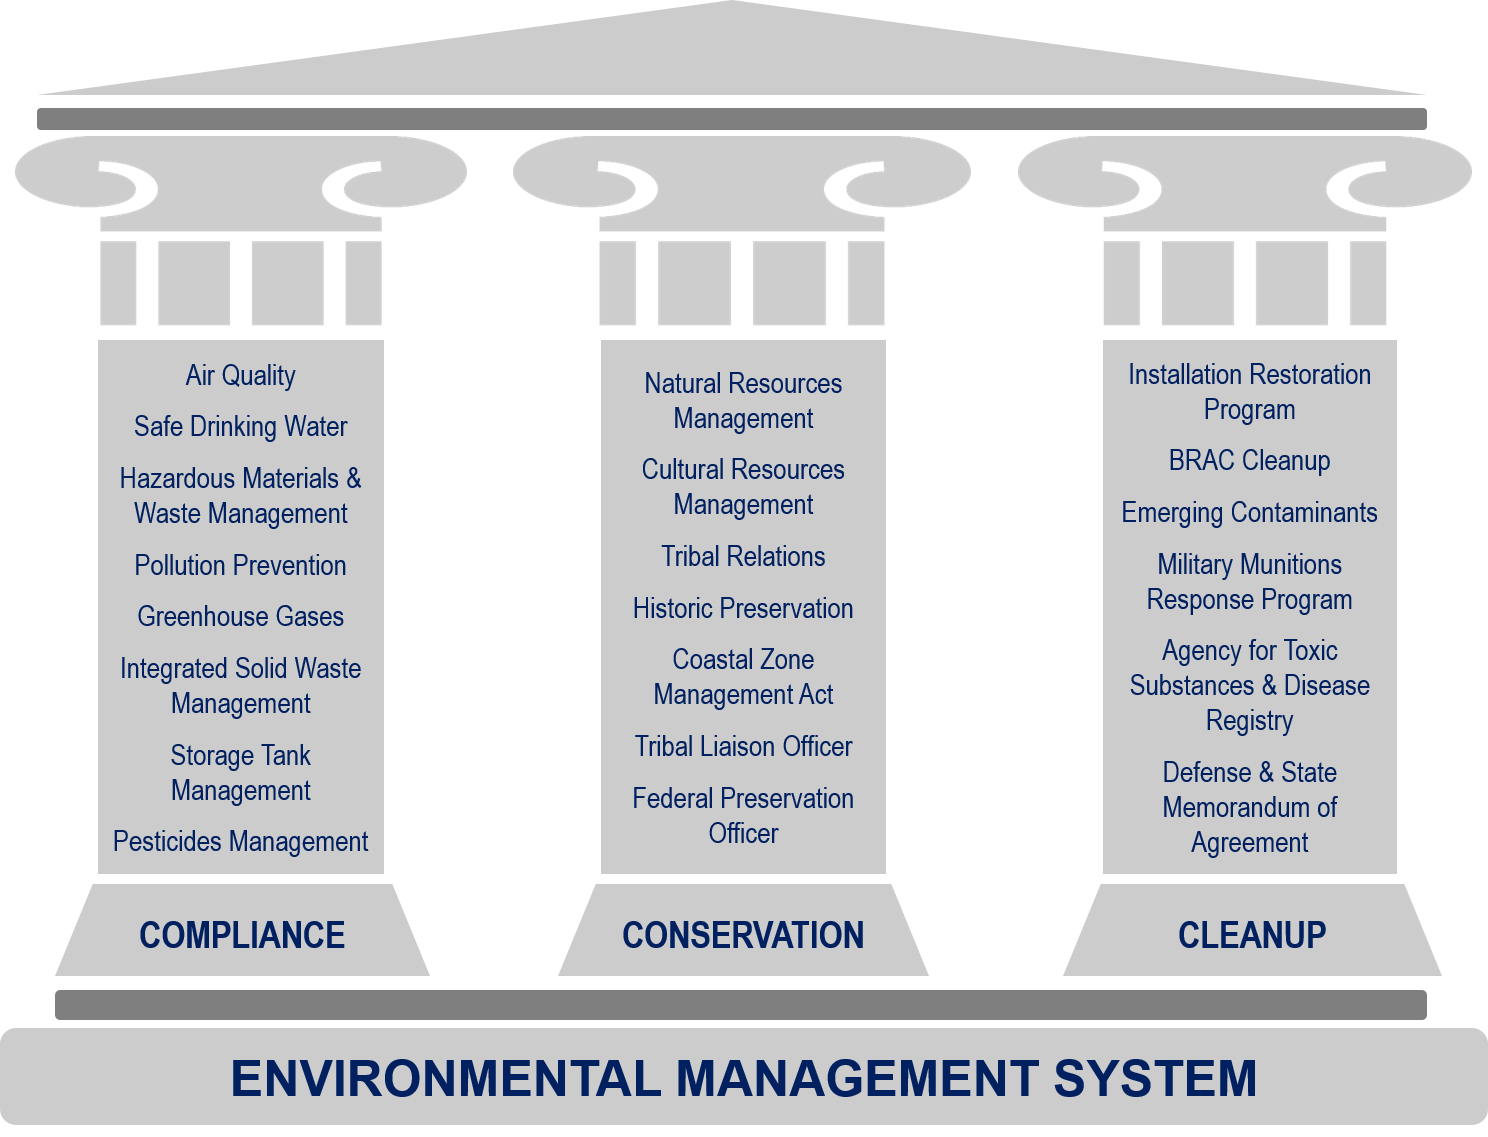 The three pillars of the Environmental Management System